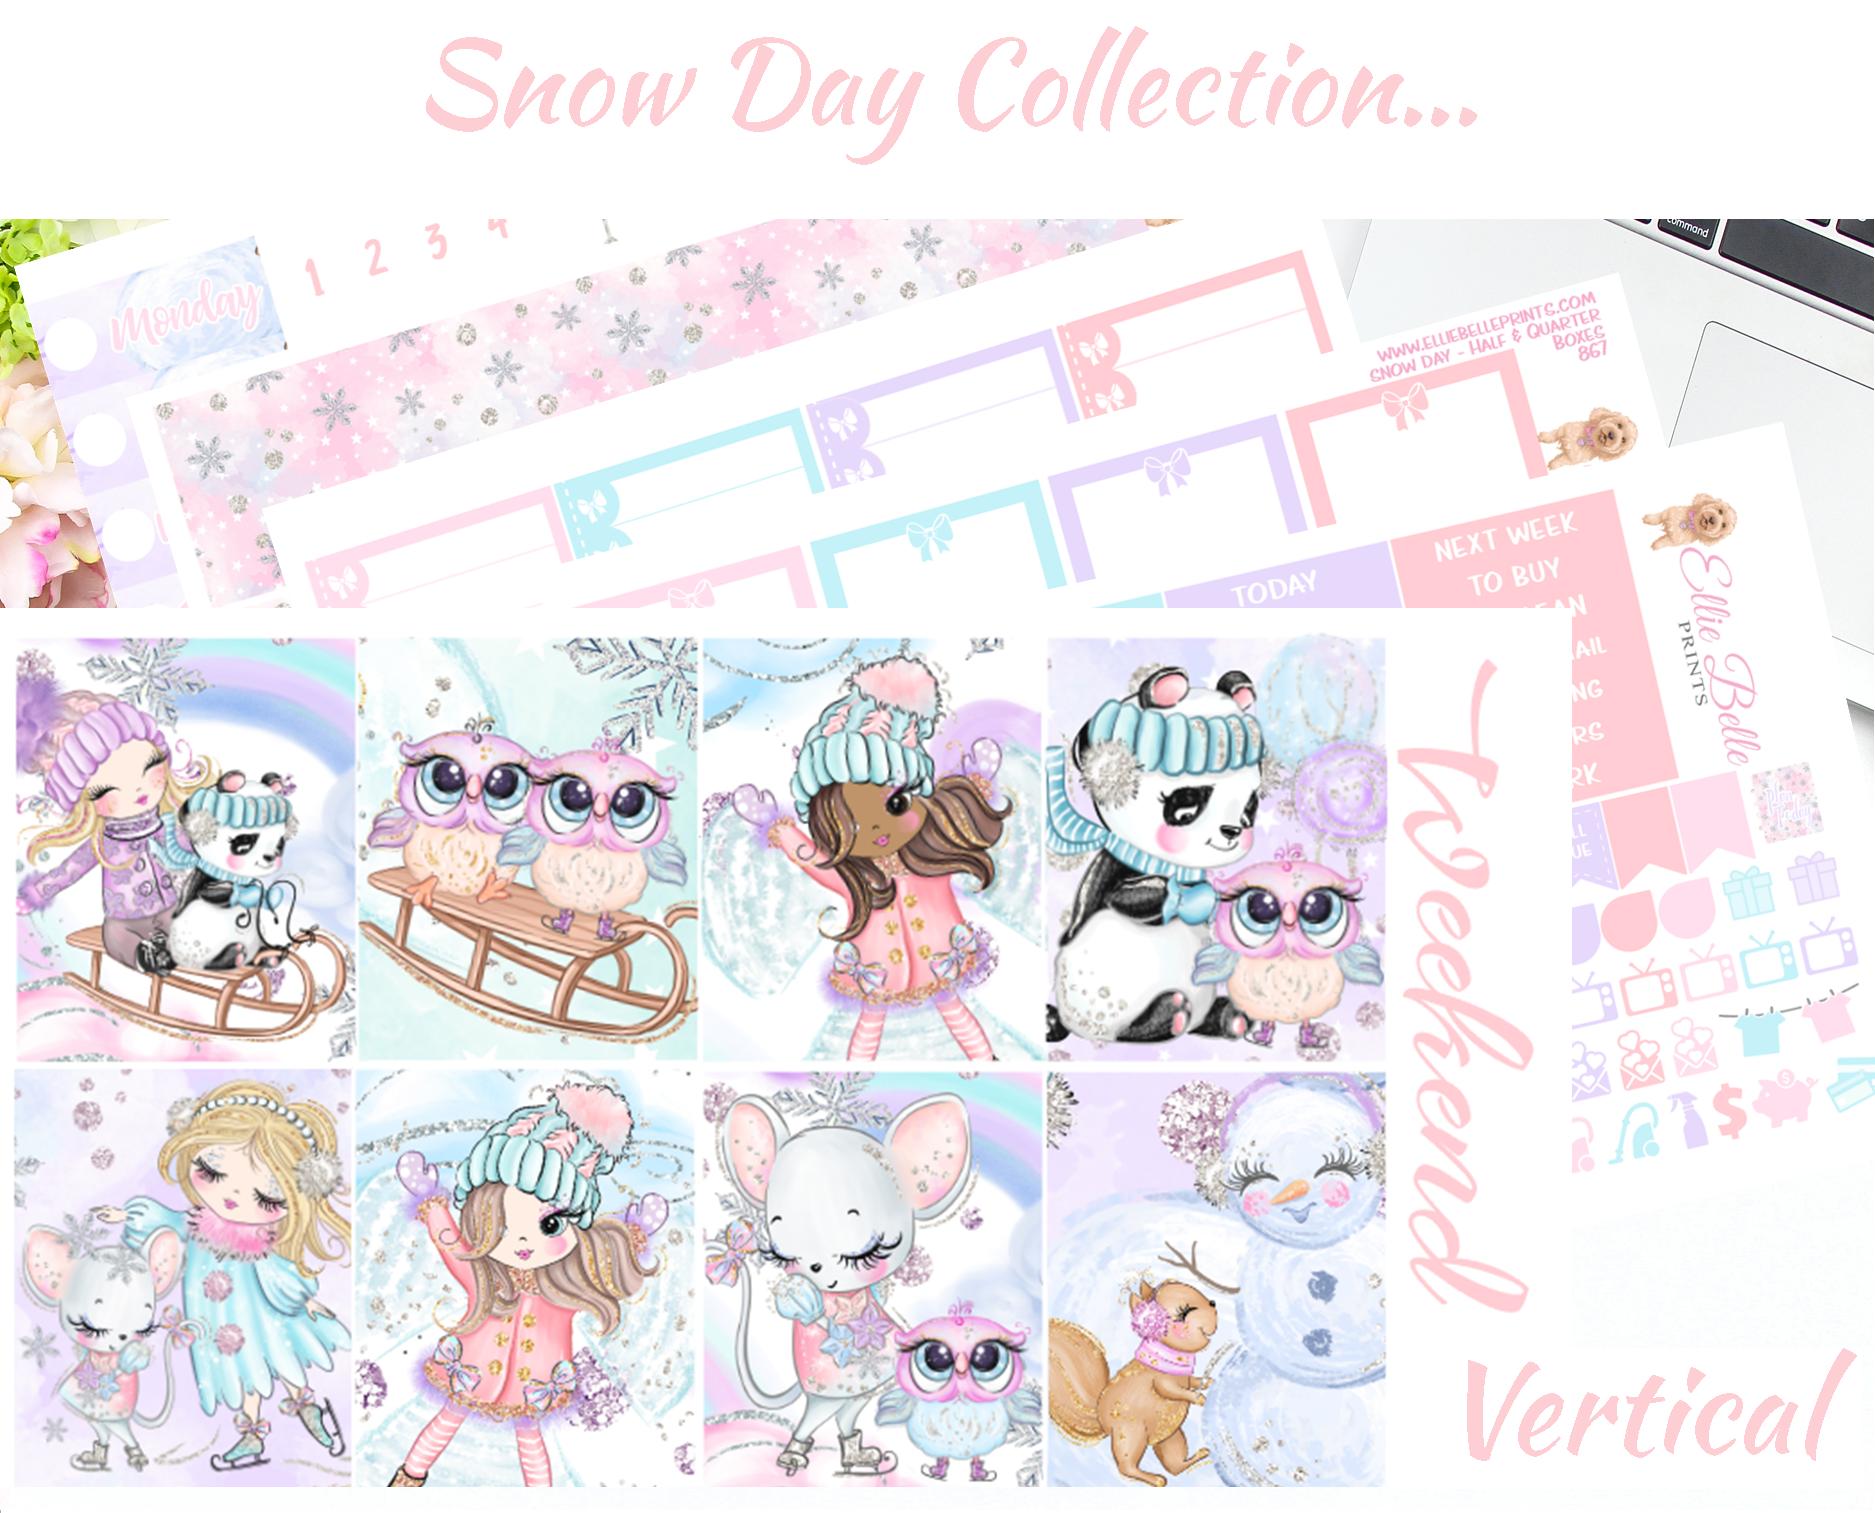 Snow Day - Vertical Weekly Planner Kit